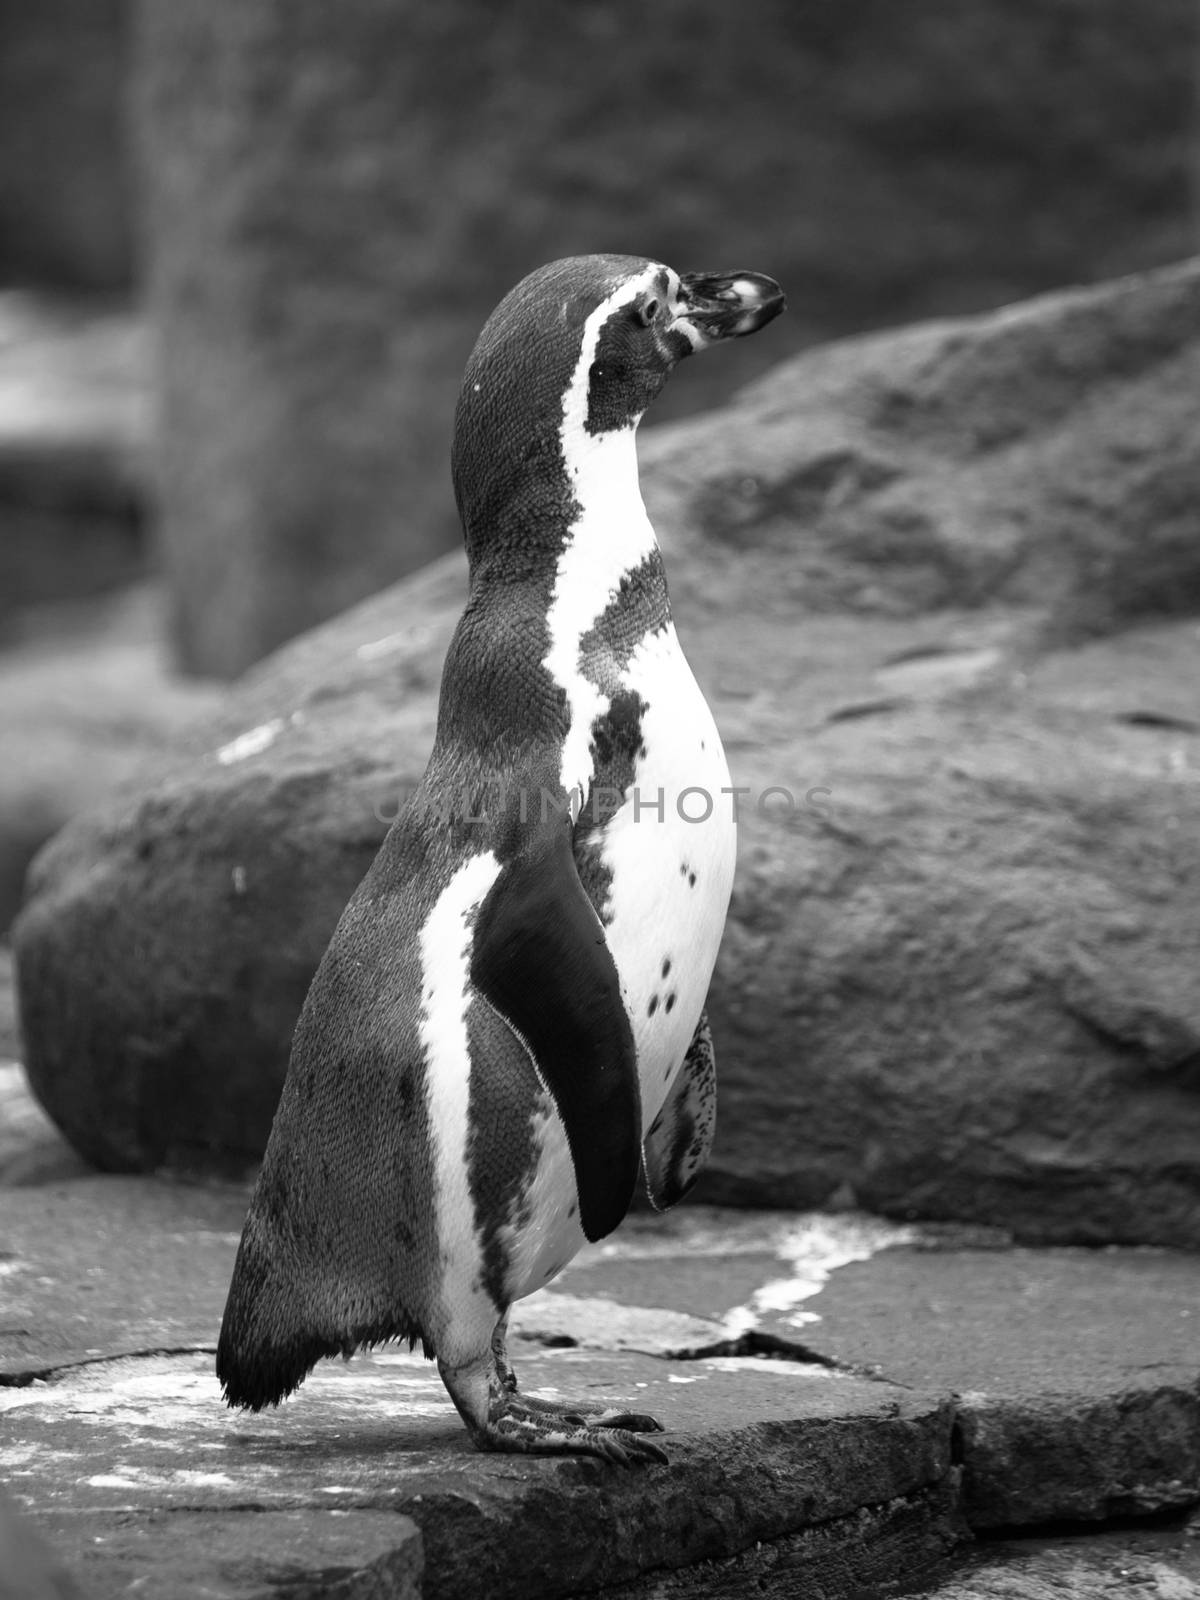 The Humboldts Penguin or Peruvian Penguin standing on the ground.